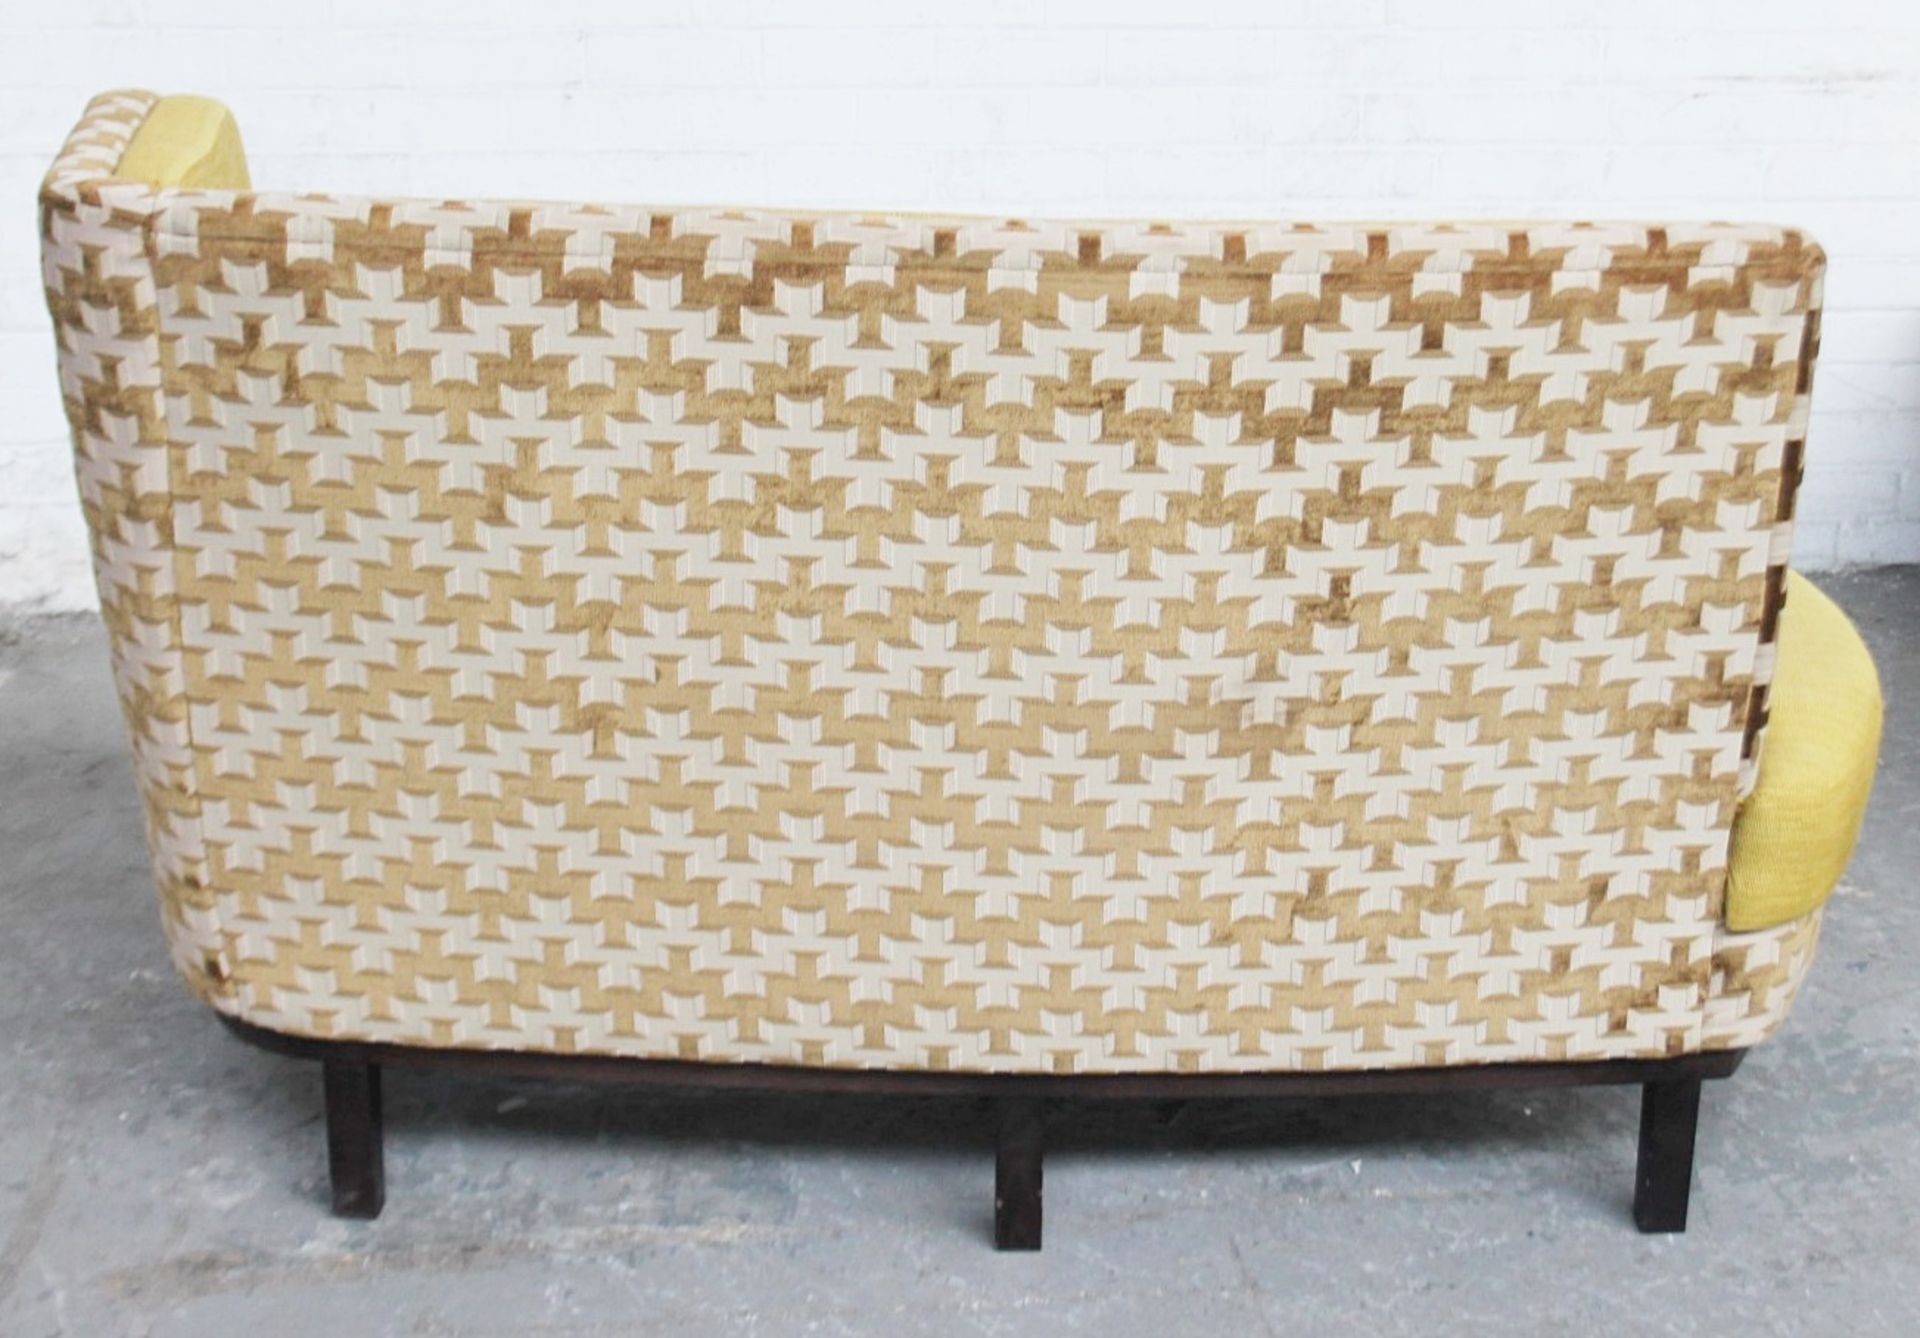 1 x Commercial Freestanding Right-Hand 2-Seater Bench, Upholstered In Premium Gold-Coloured Fabrics, - Image 2 of 9